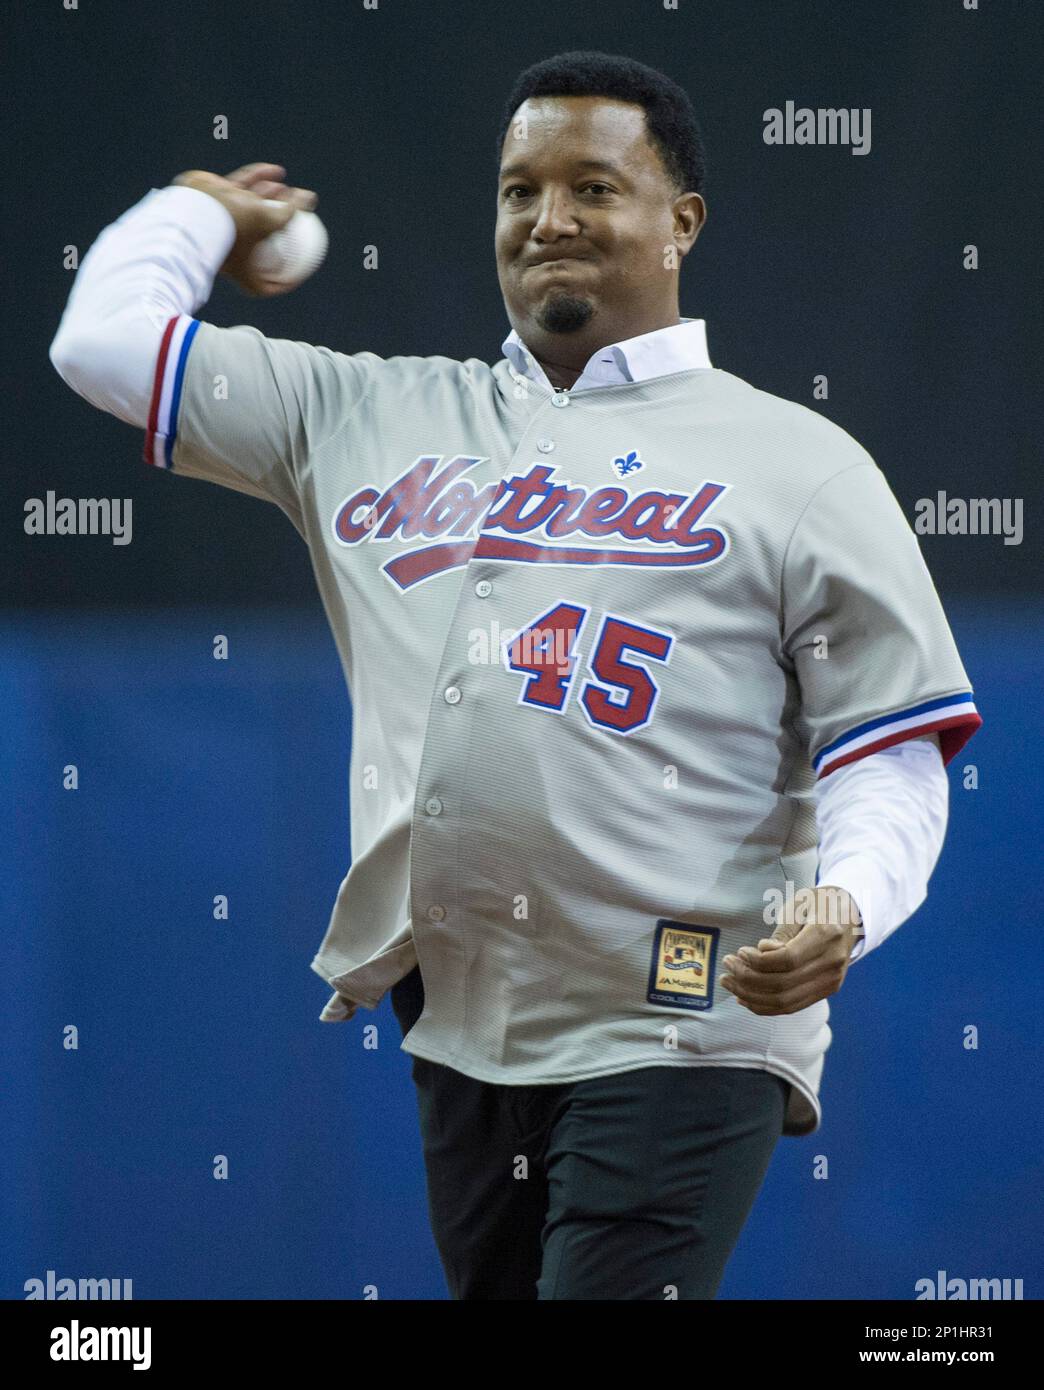 Pedro Martinez throws first pitch at Blue Jays game in Expos jersey